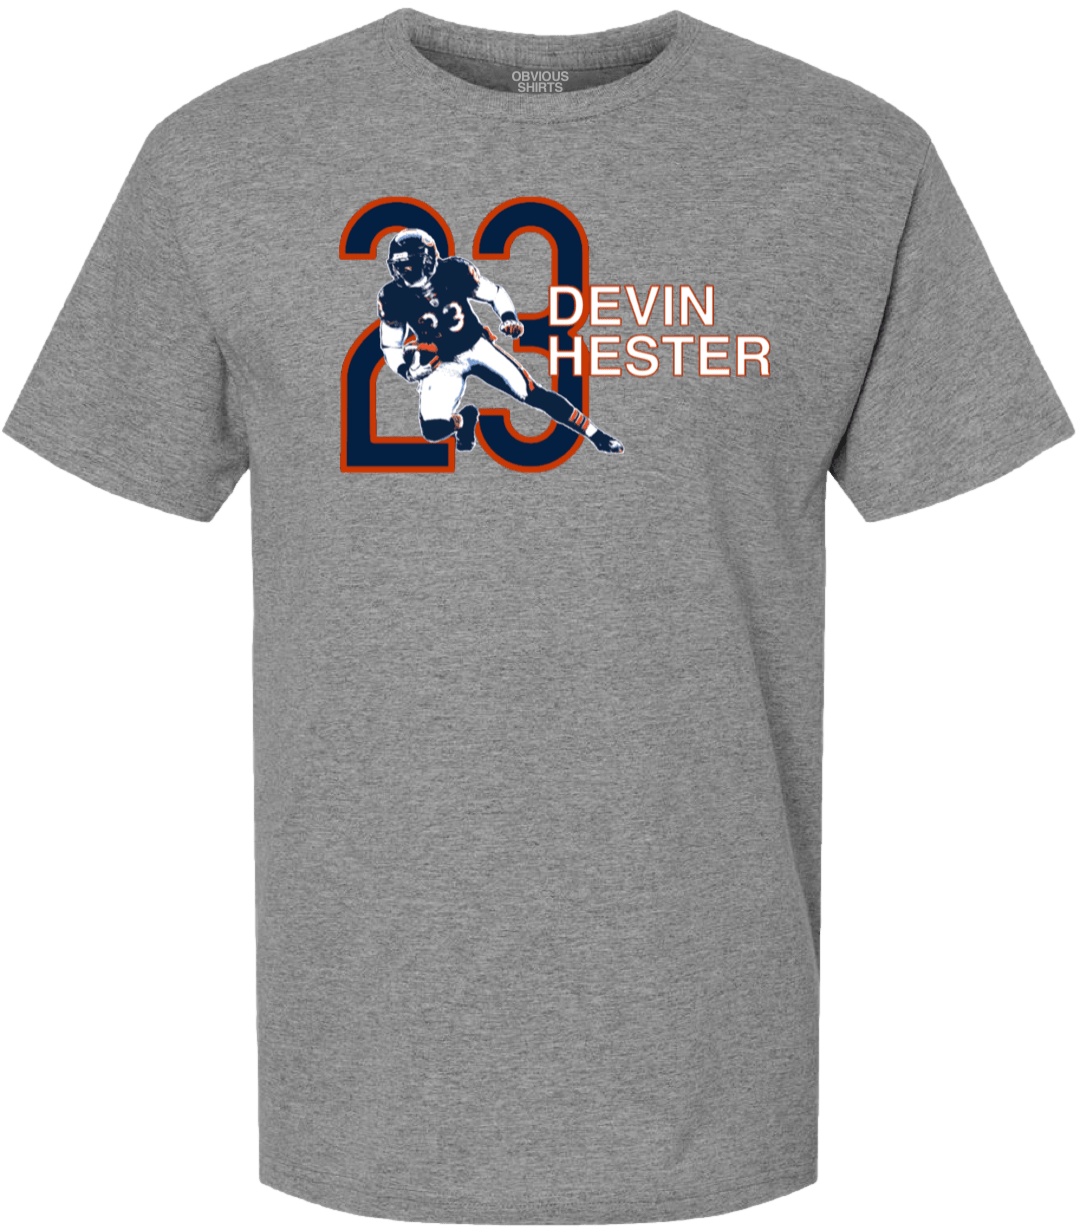 DEVIN HESTER GRAPHIC. - OBVIOUS SHIRTS